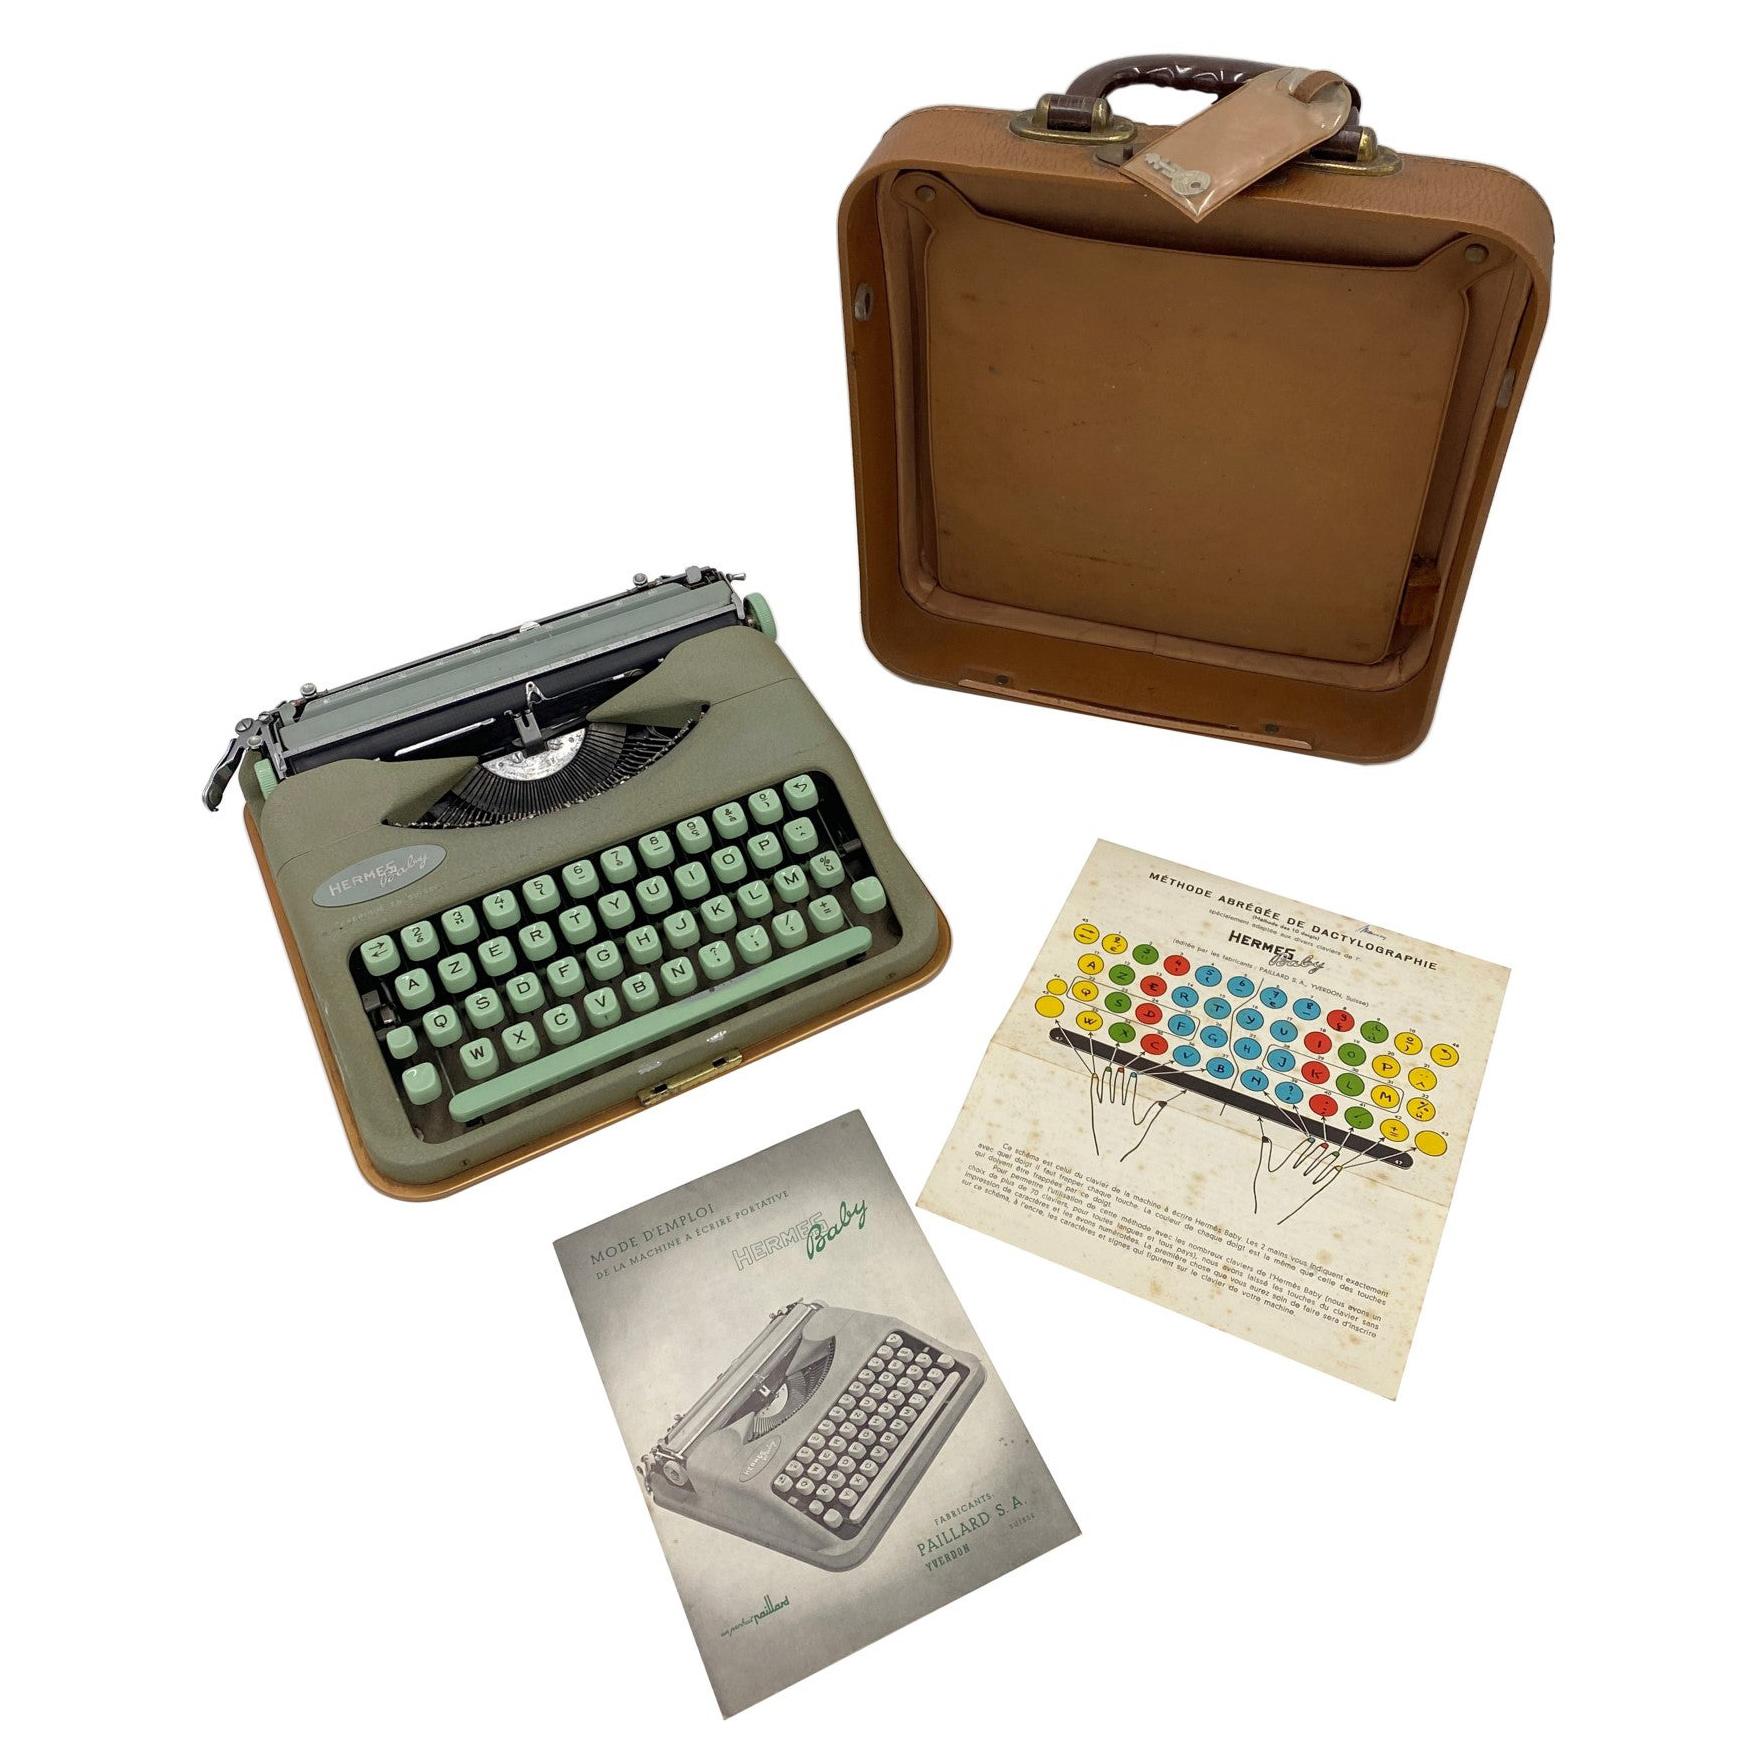 1960s Hermes Baby Typewriter Mint Green Color with Paperwork and Key